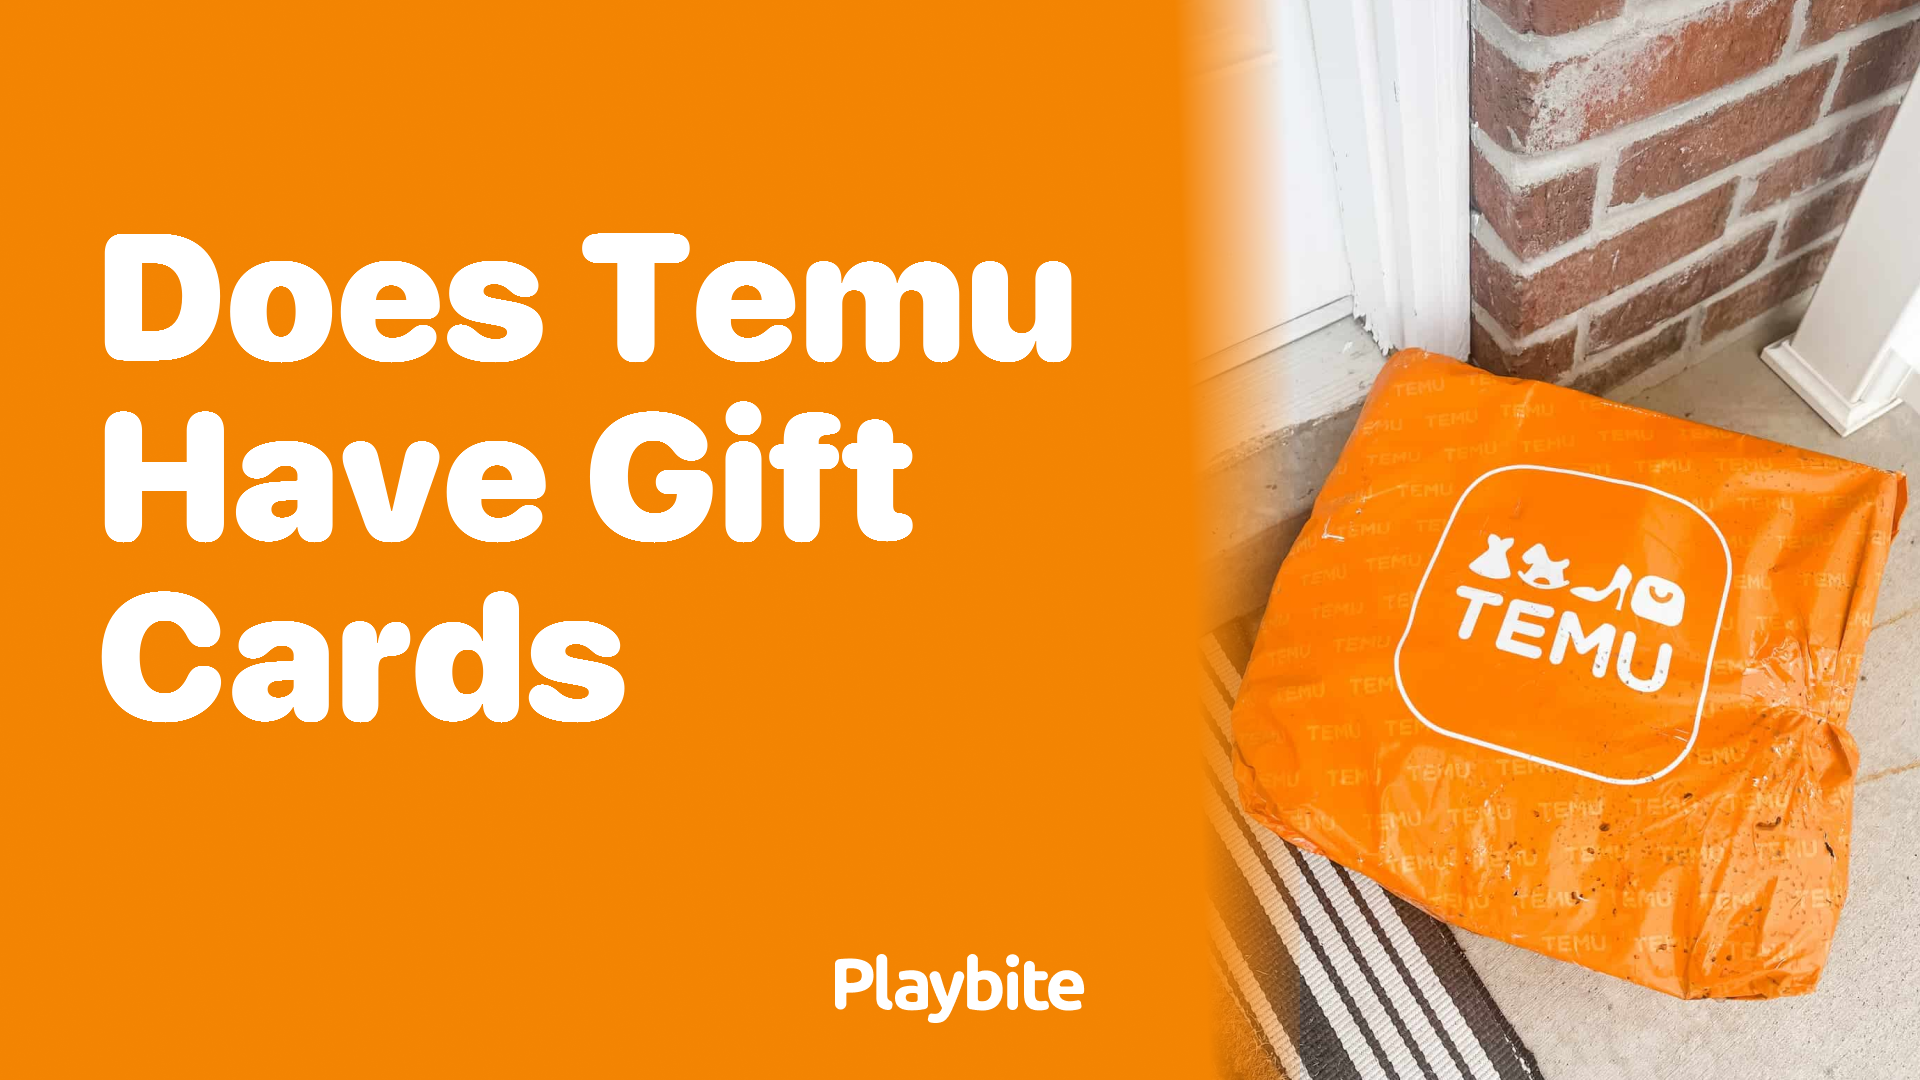 Does Temu Offer Gift Cards for Shoppers?